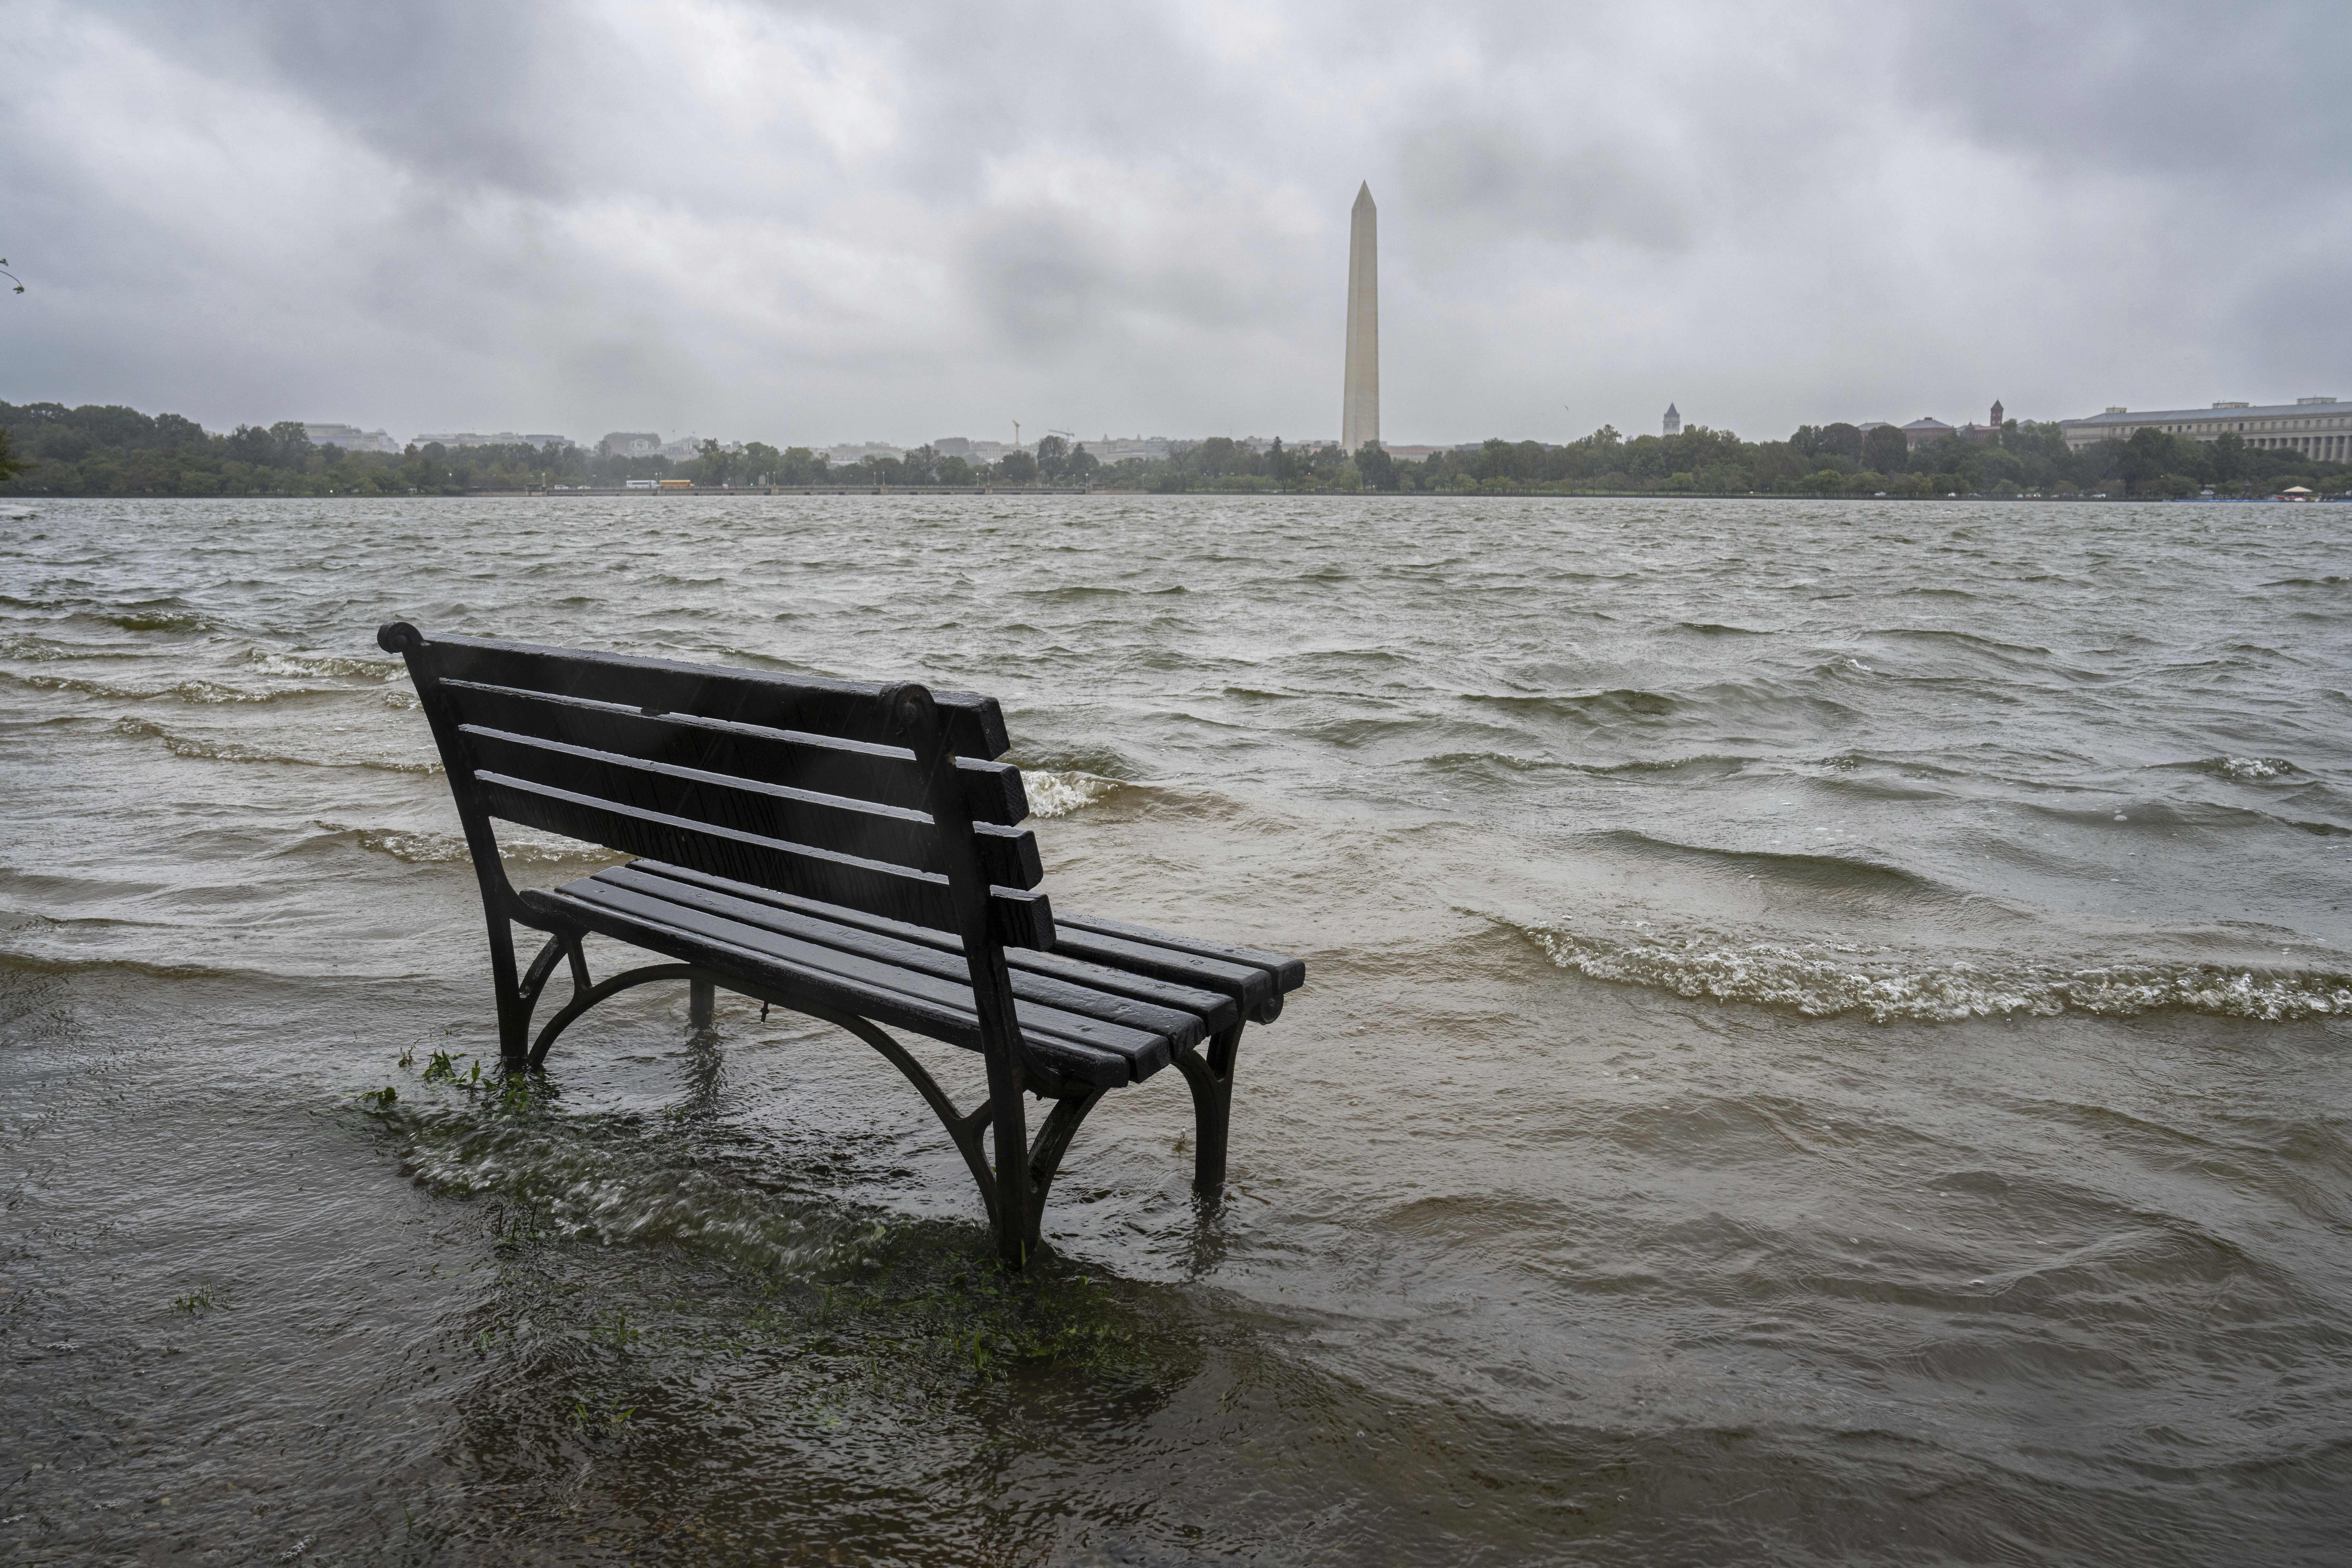 The Tidal Basin in Washington overflows the banks with the rain from Tropical Storm Ophelia, Saturday, Sept. 23, 2023. The National Weather Service has issued a coastal flooding warning for the area. (AP Photo/J. David Ake)